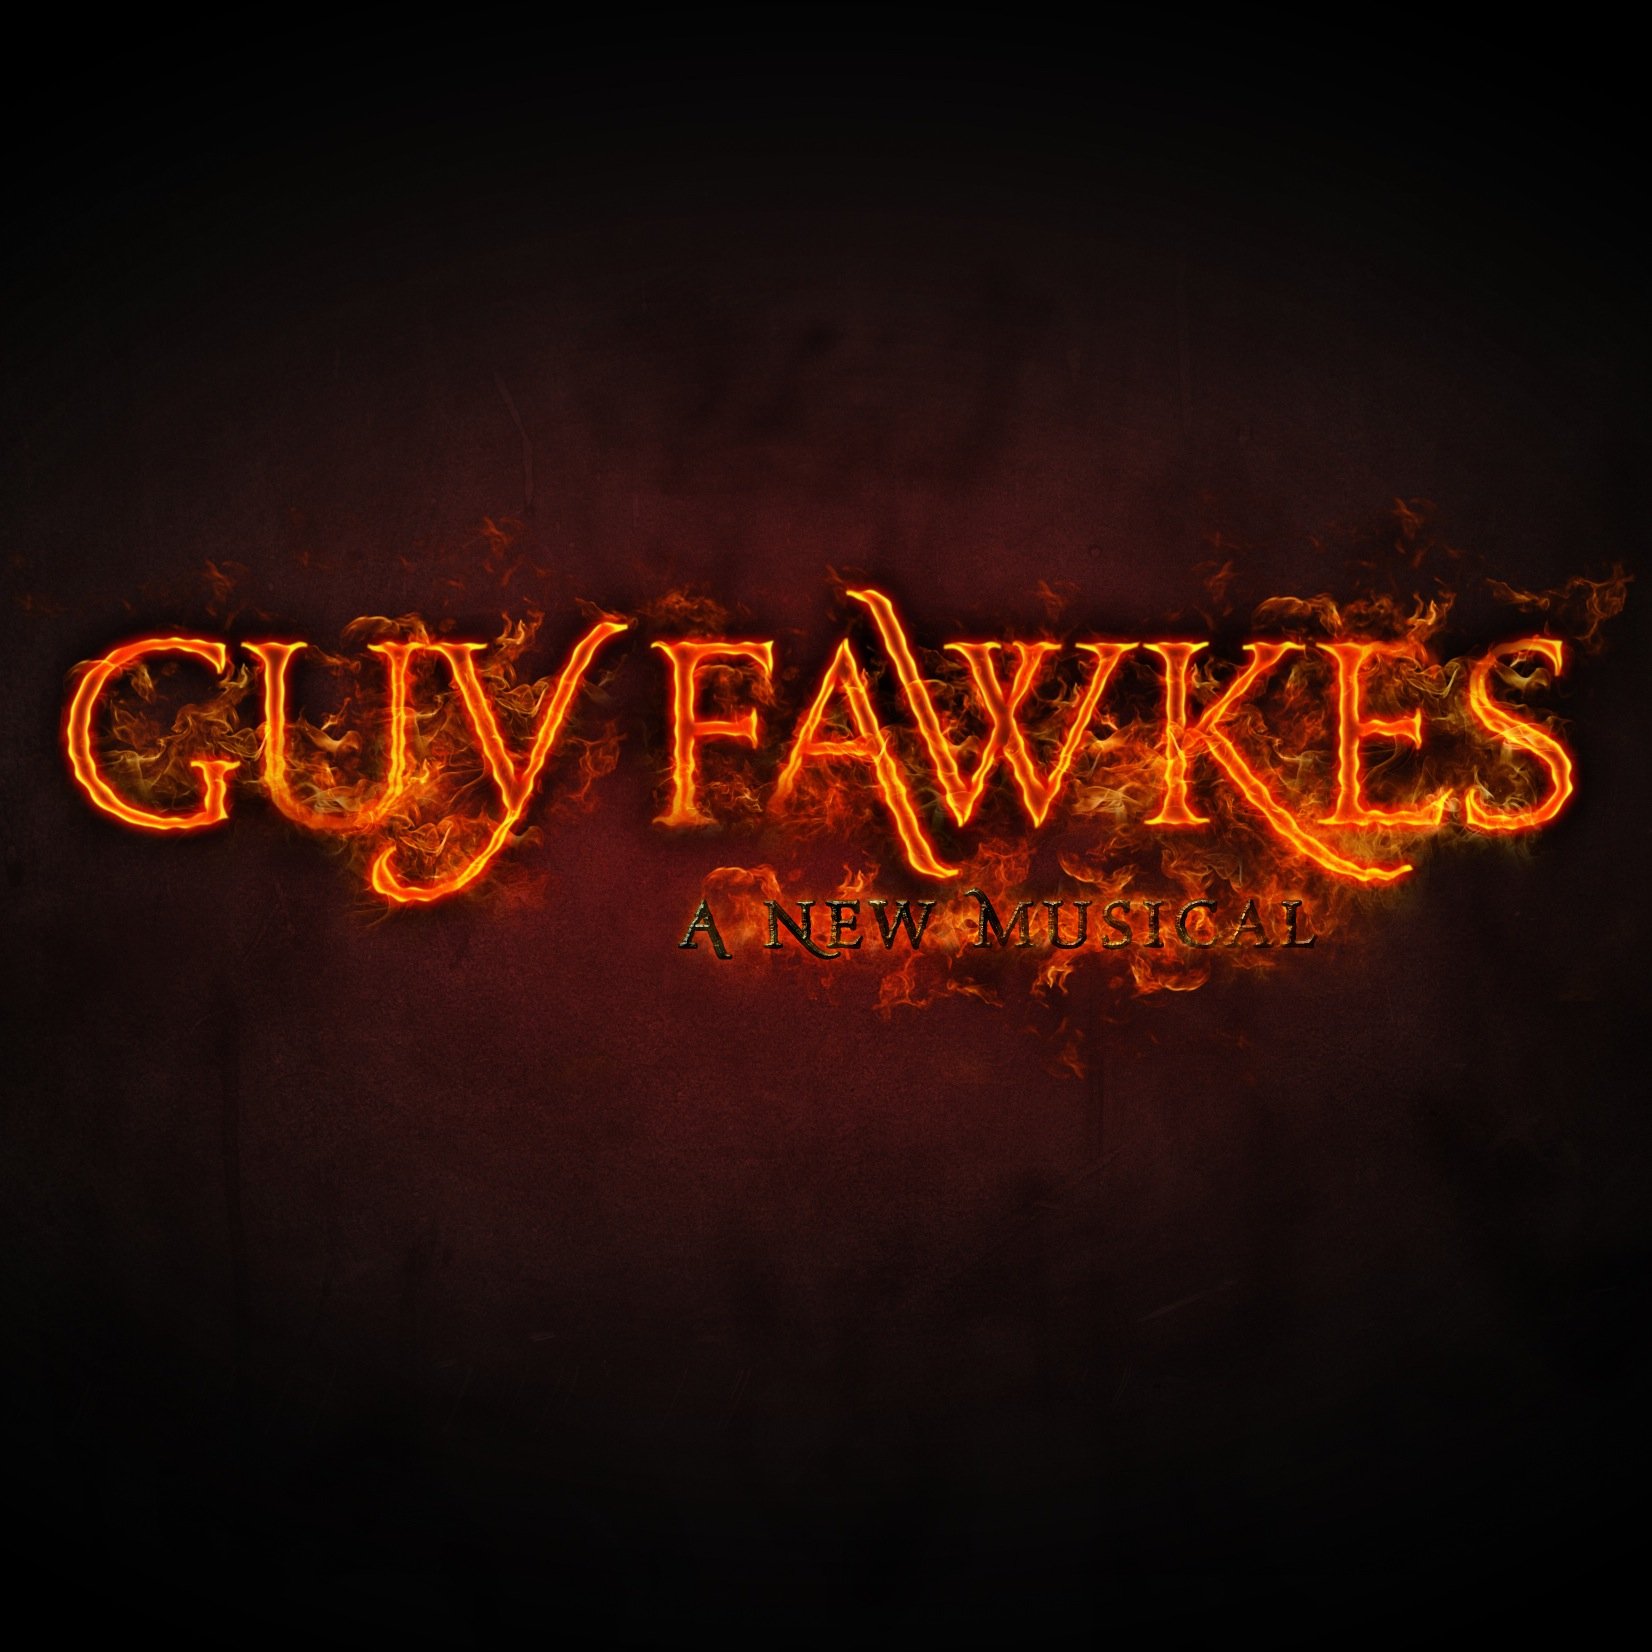 Guy Fawkes Musical